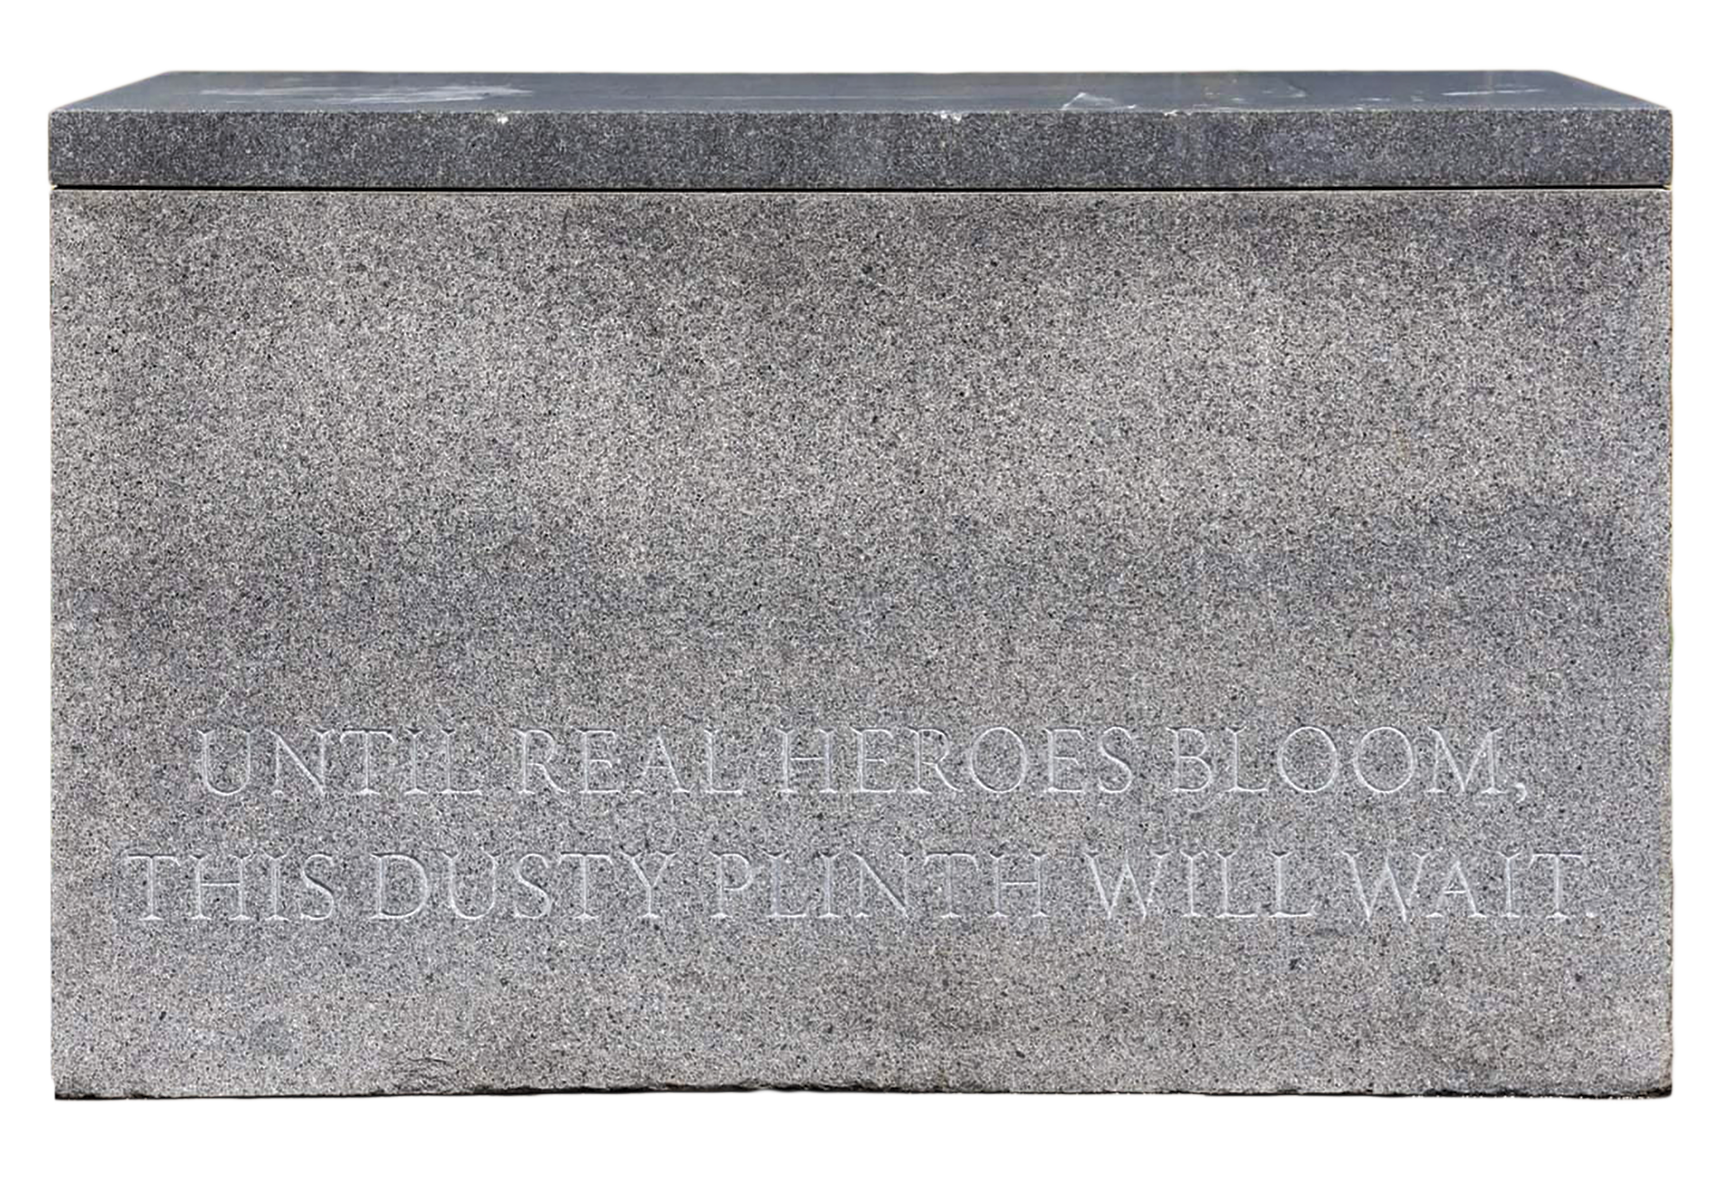 A gray stone slab inscribed with the words, "Until real heroes bloom, this dusty plinth will wait."